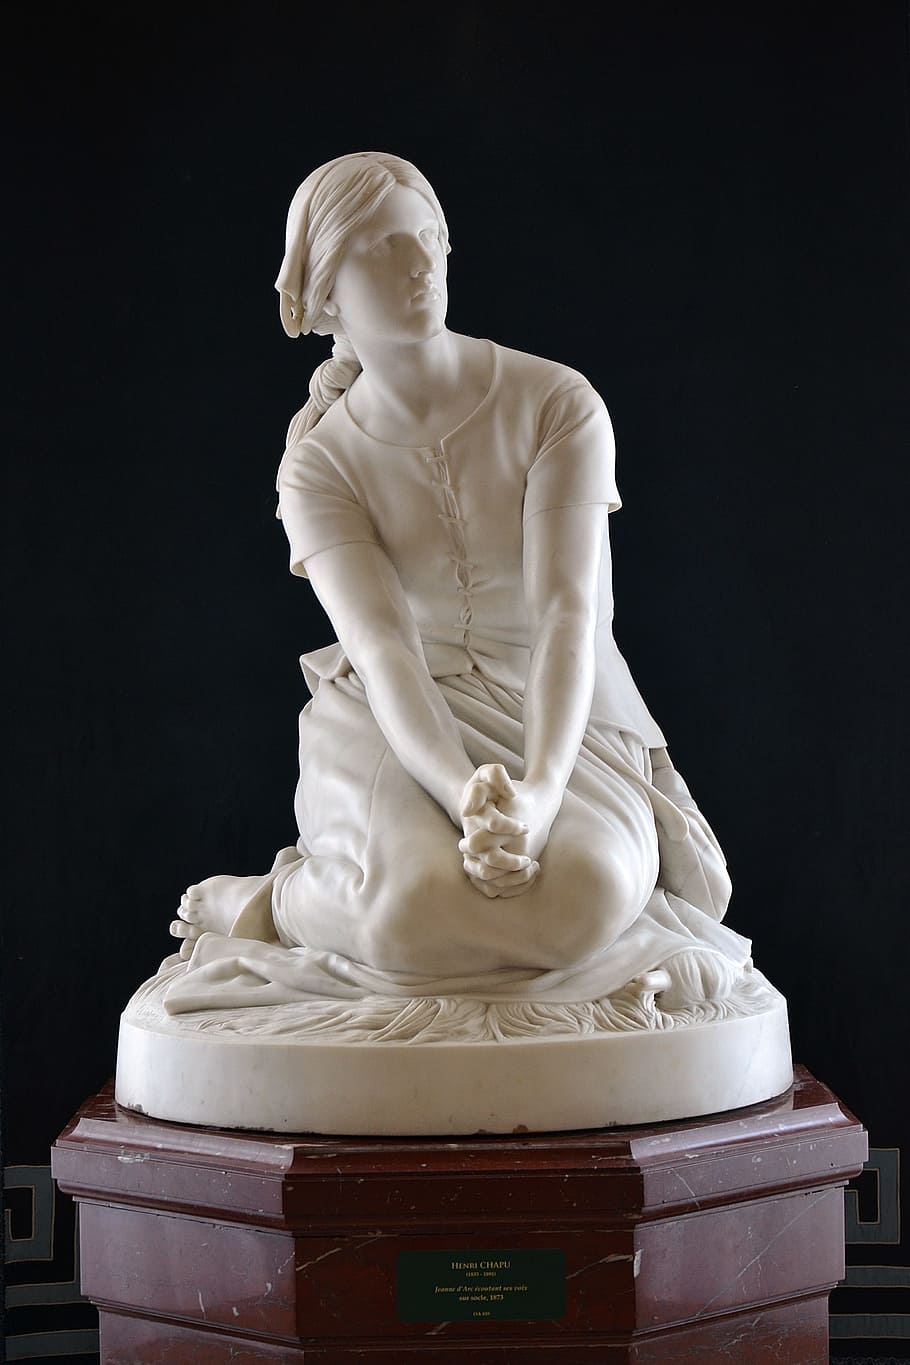 france, oise, picardie, chantilly, château de chantilly, museum, musee conde, art, sculpture, marble